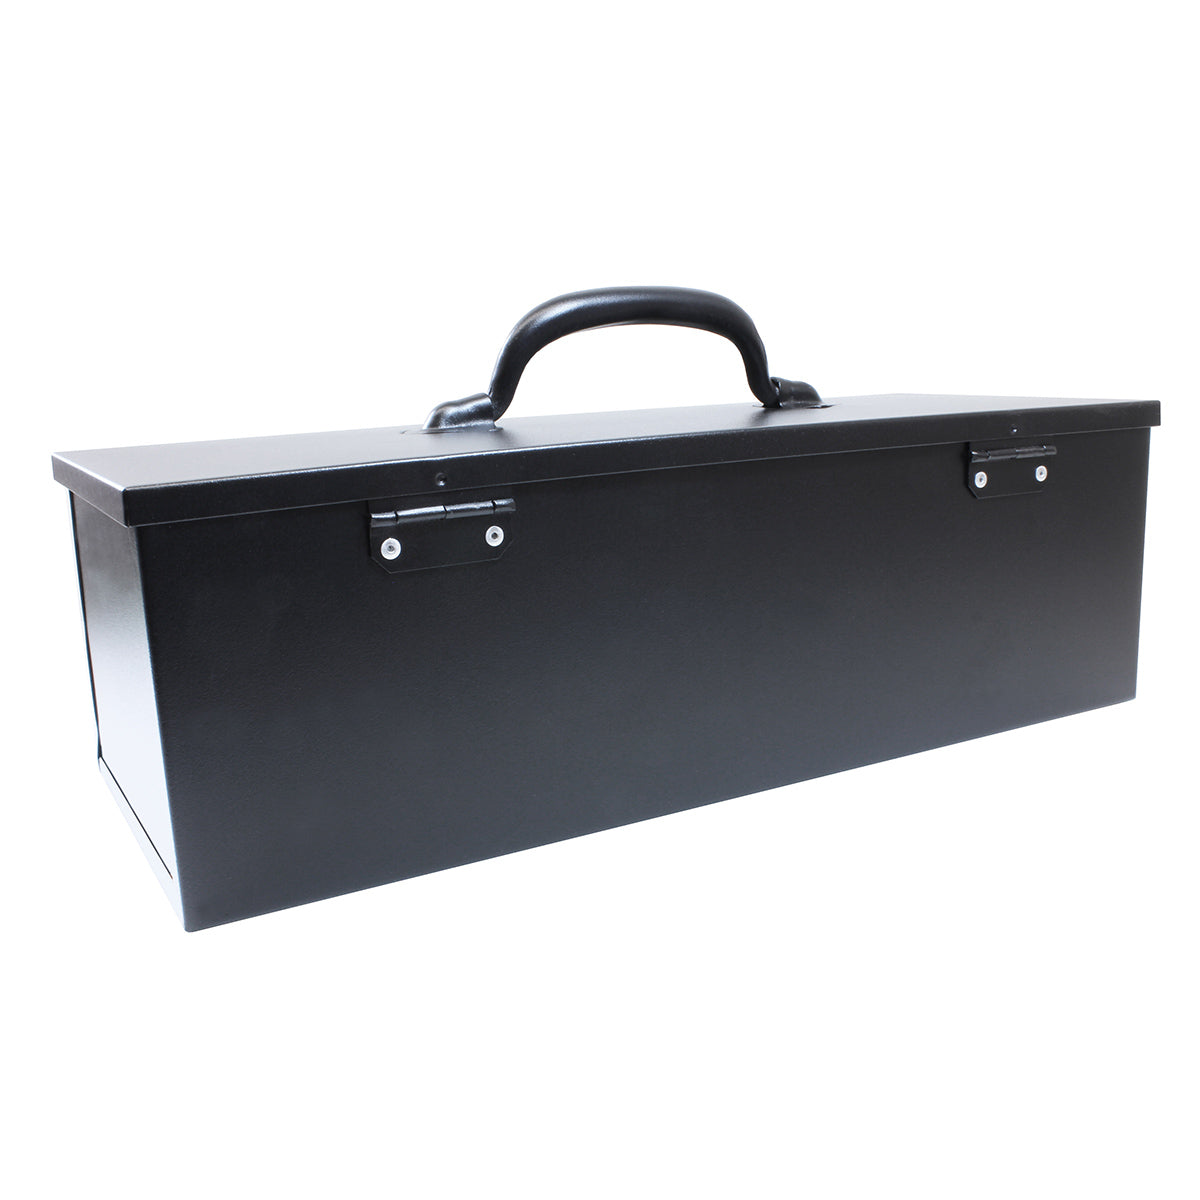 The rear of a classic matte black multi-use hobby and tool box, showing sturdily riveted hinges, as well as fold down steel handle, isolated on a white background.